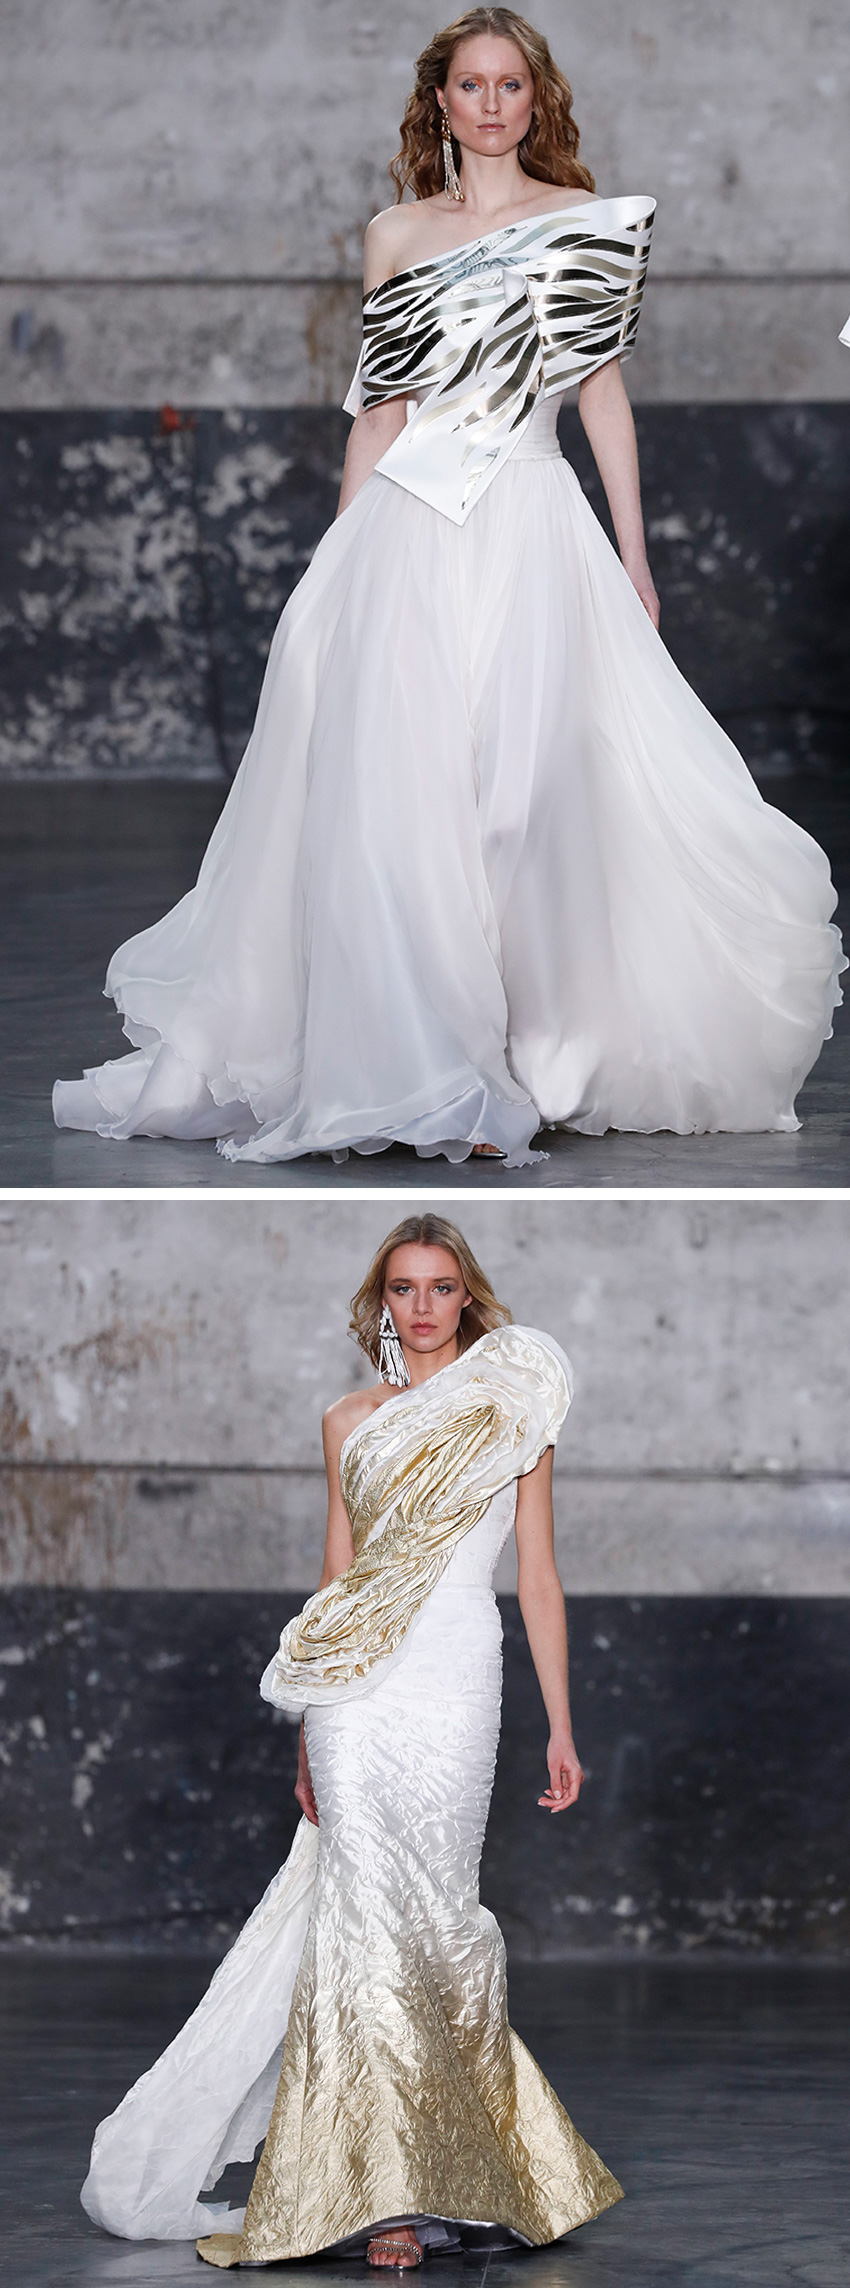 Georges Chakra Spring Summer 2022 Haute Couture Bride is inspired in the Grecian Classism